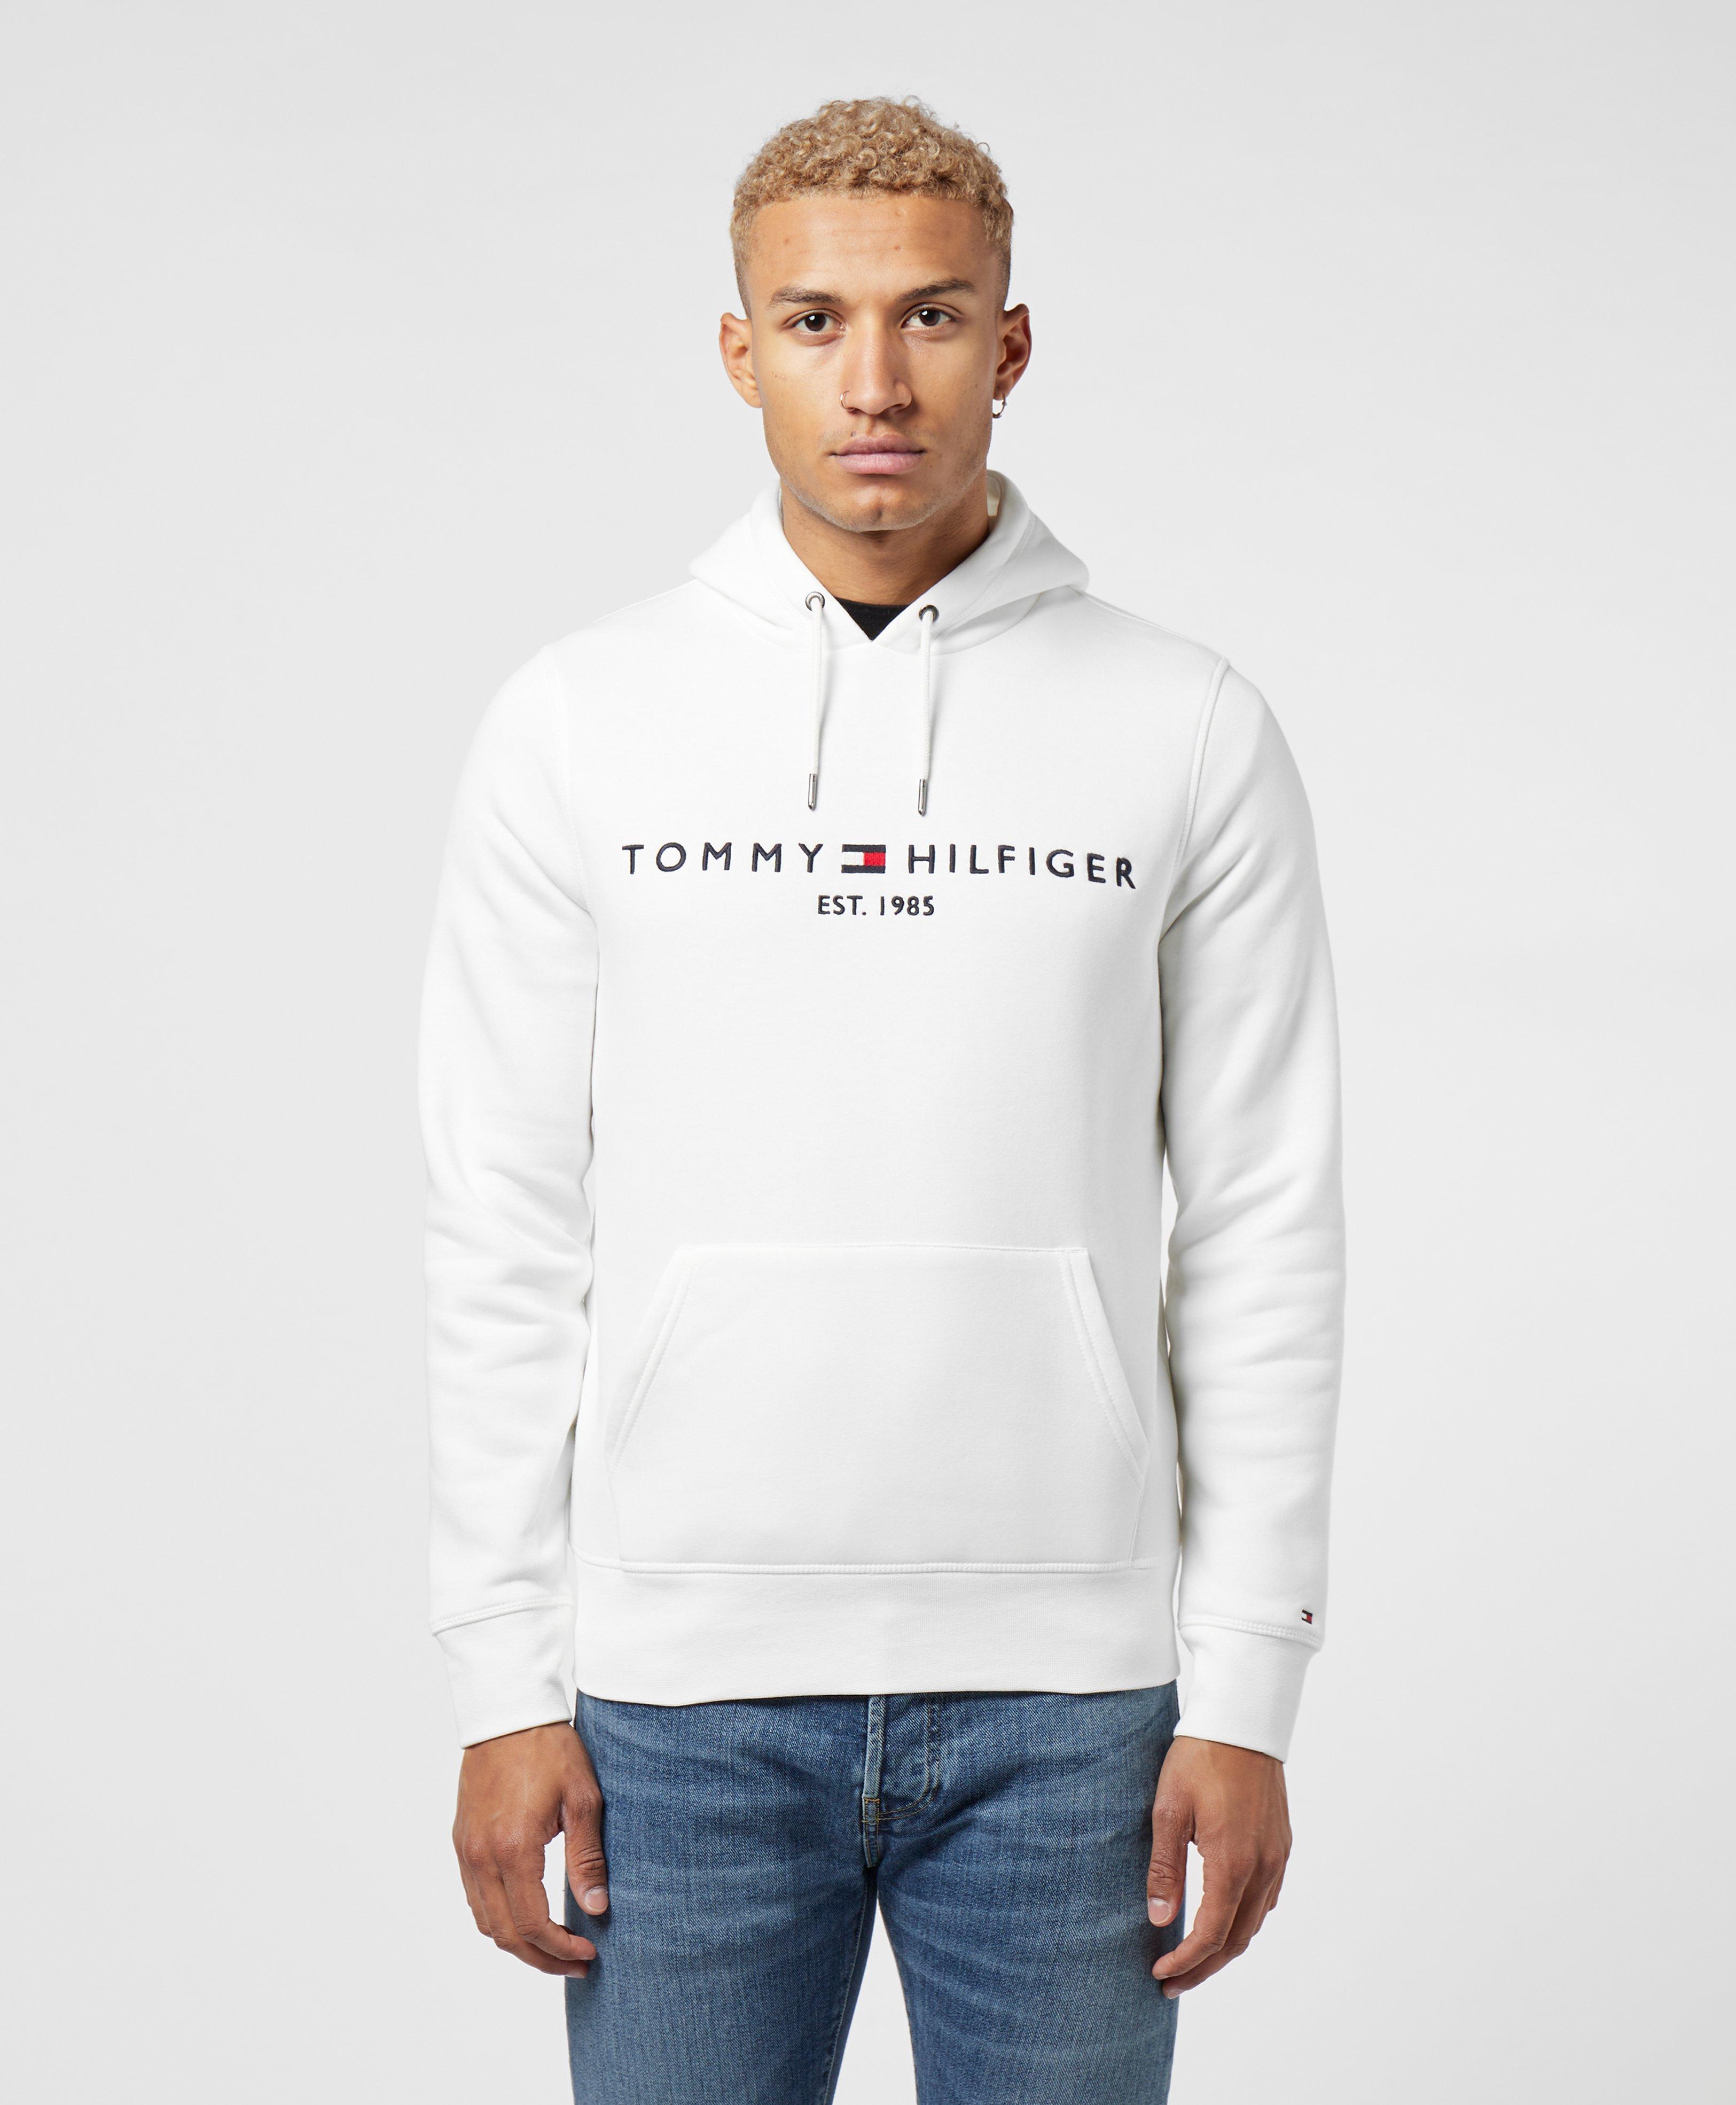 Tommy Hilfiger Logo Overhead Hoodie in White for Men - Lyst